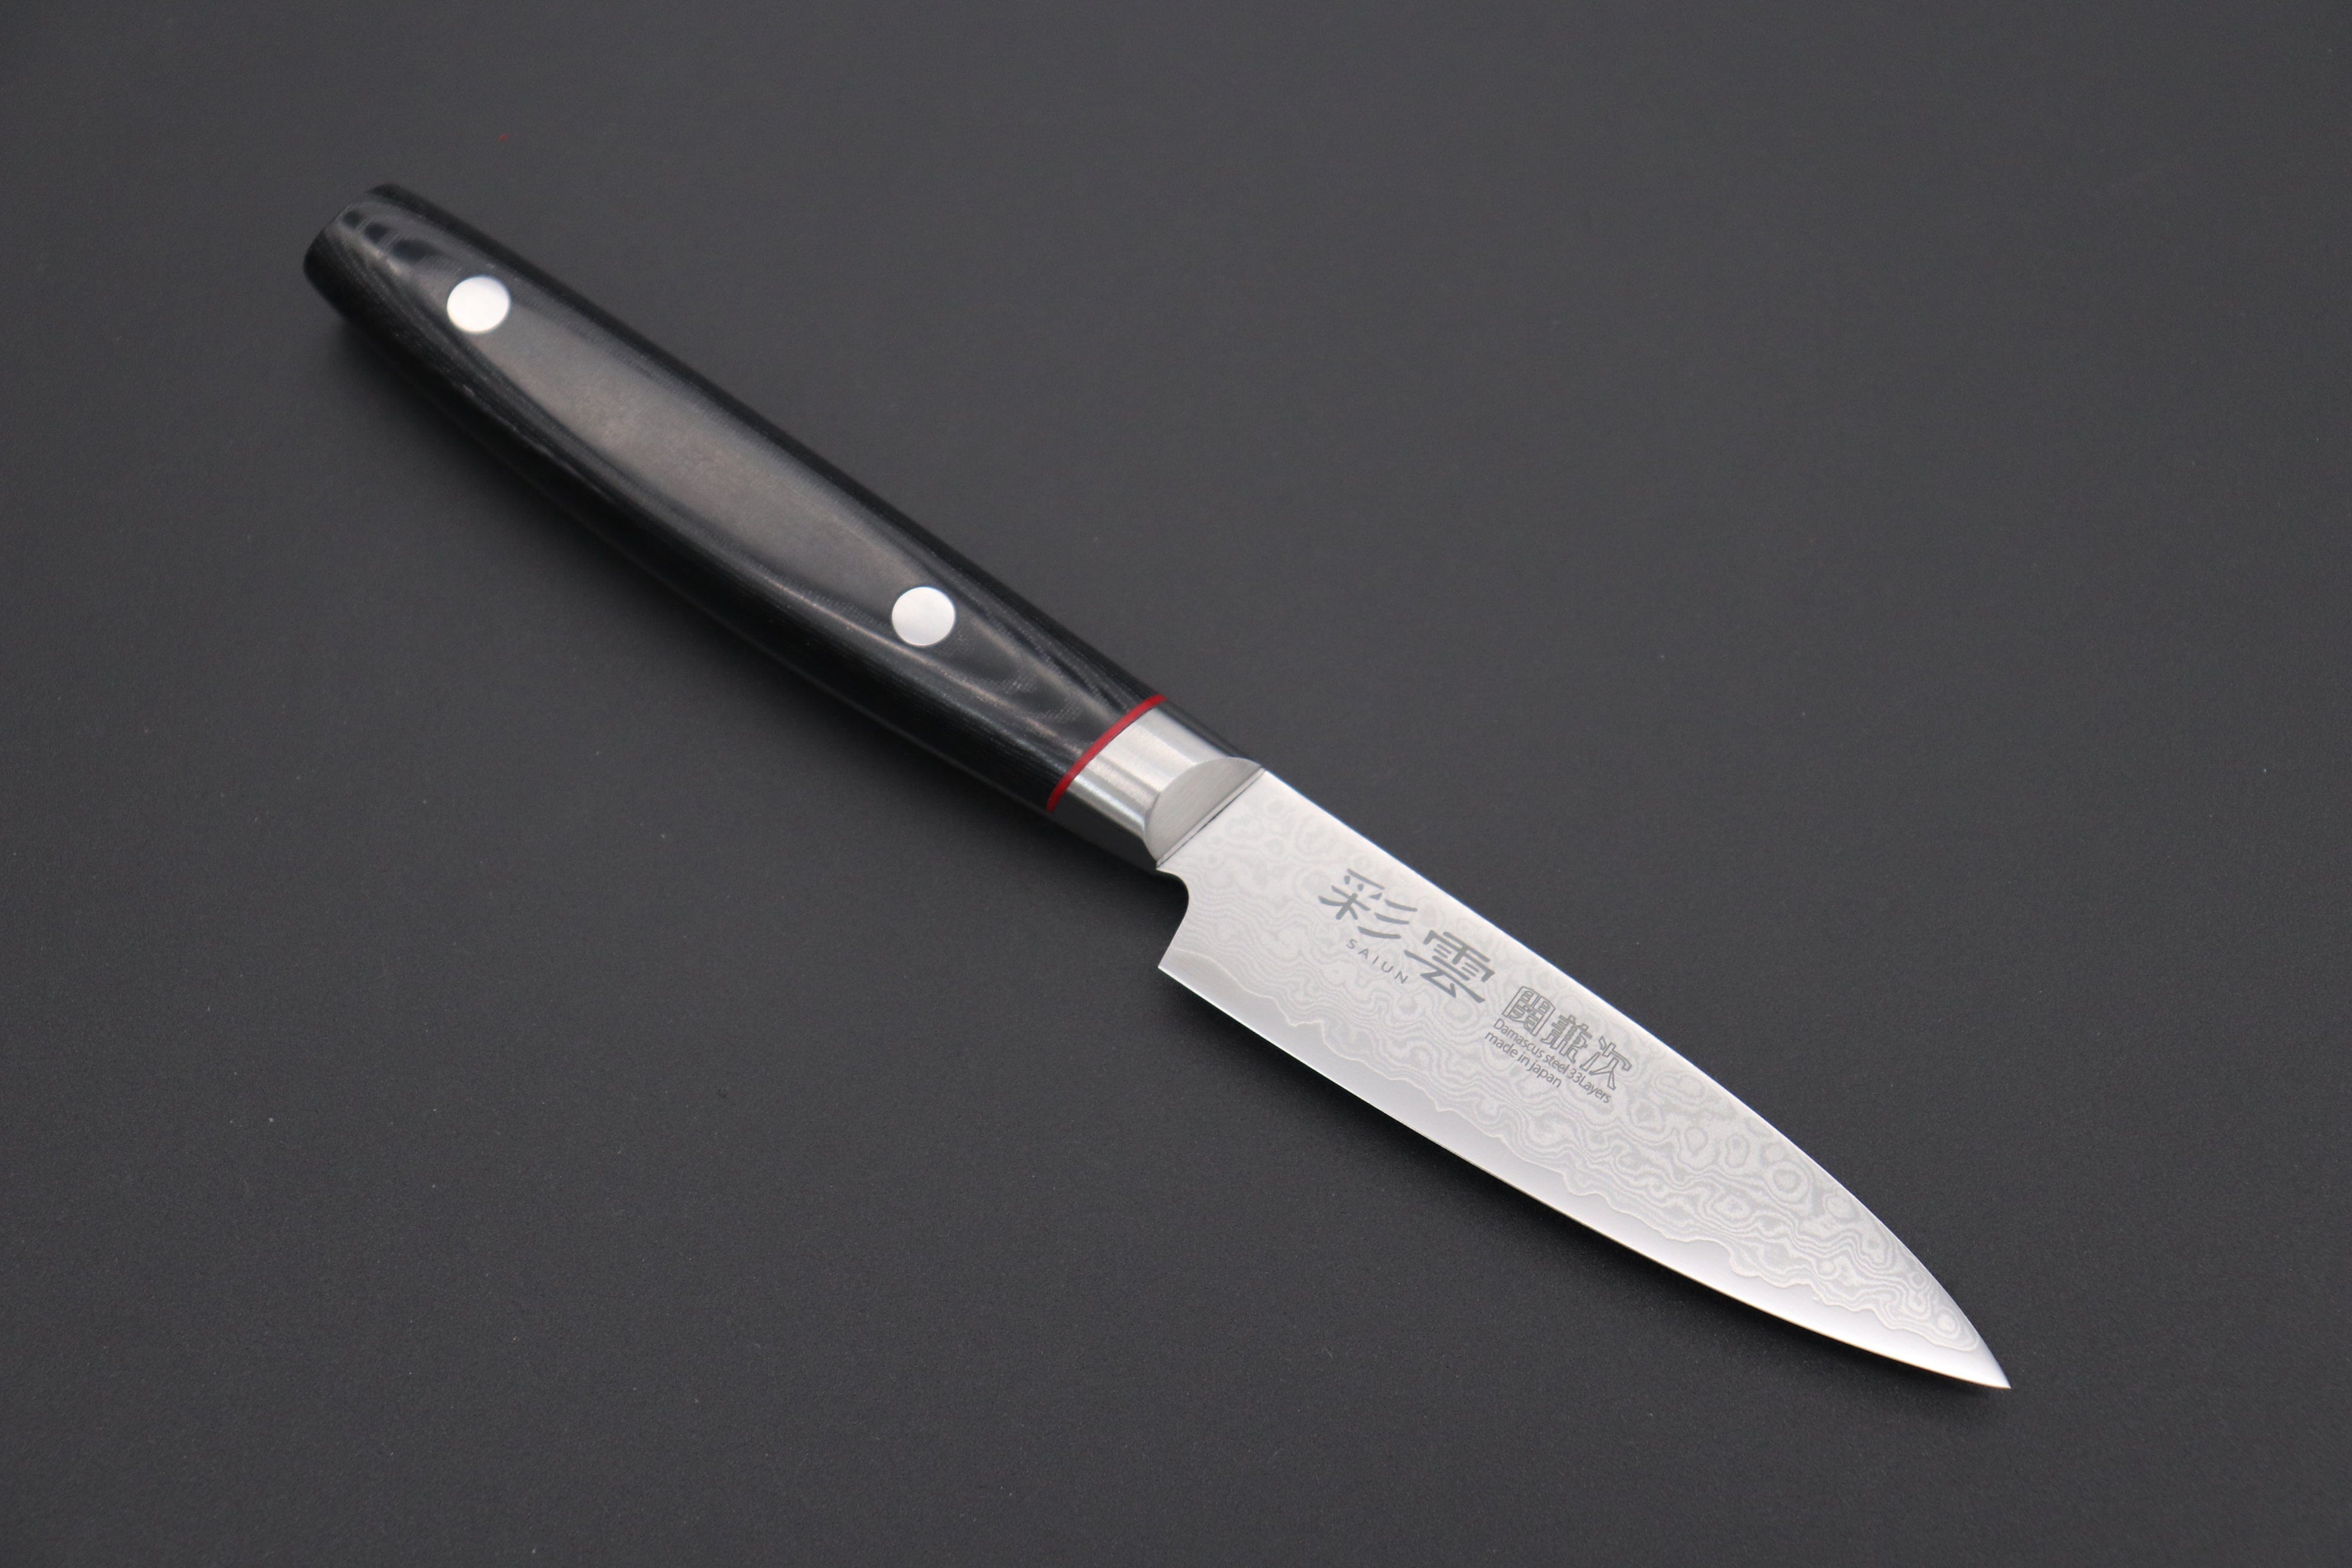 Paring Knife with Sheath Cover, 3.5-Inch Stainless Steel Blade